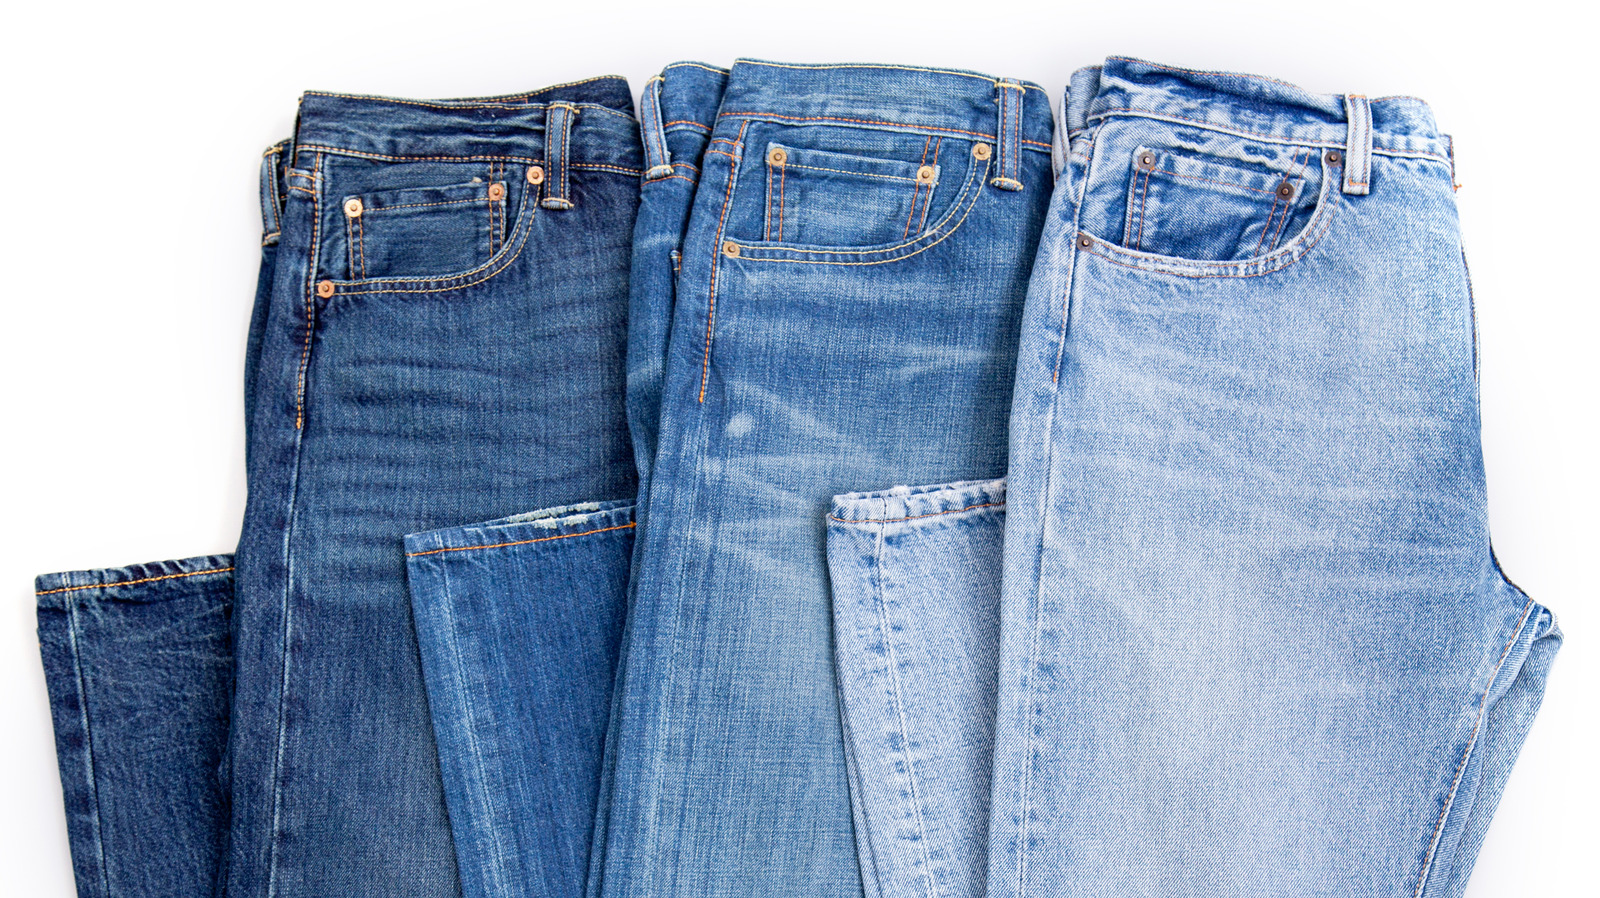 29 Best Pairs Of Jeans For Women In 2022